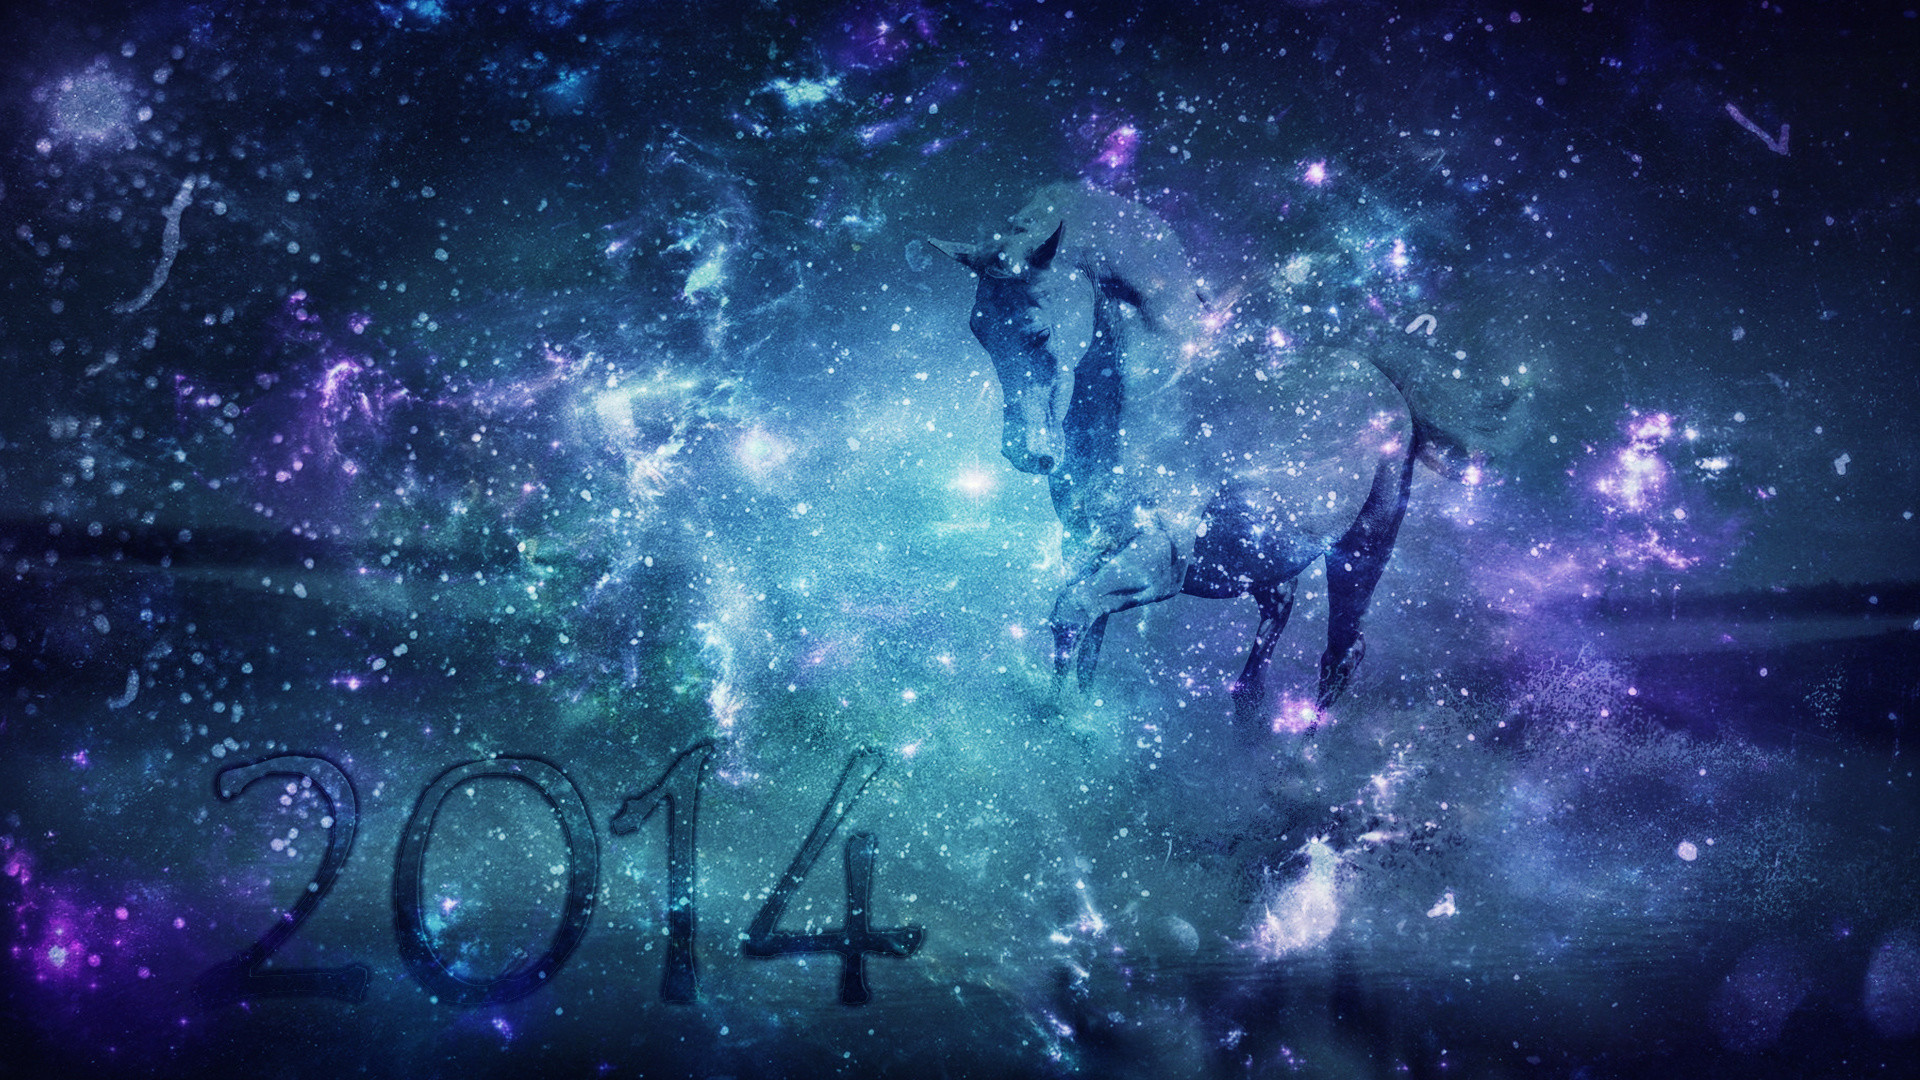 1920x1080 New year holiday background horse 2014 wallpaper .